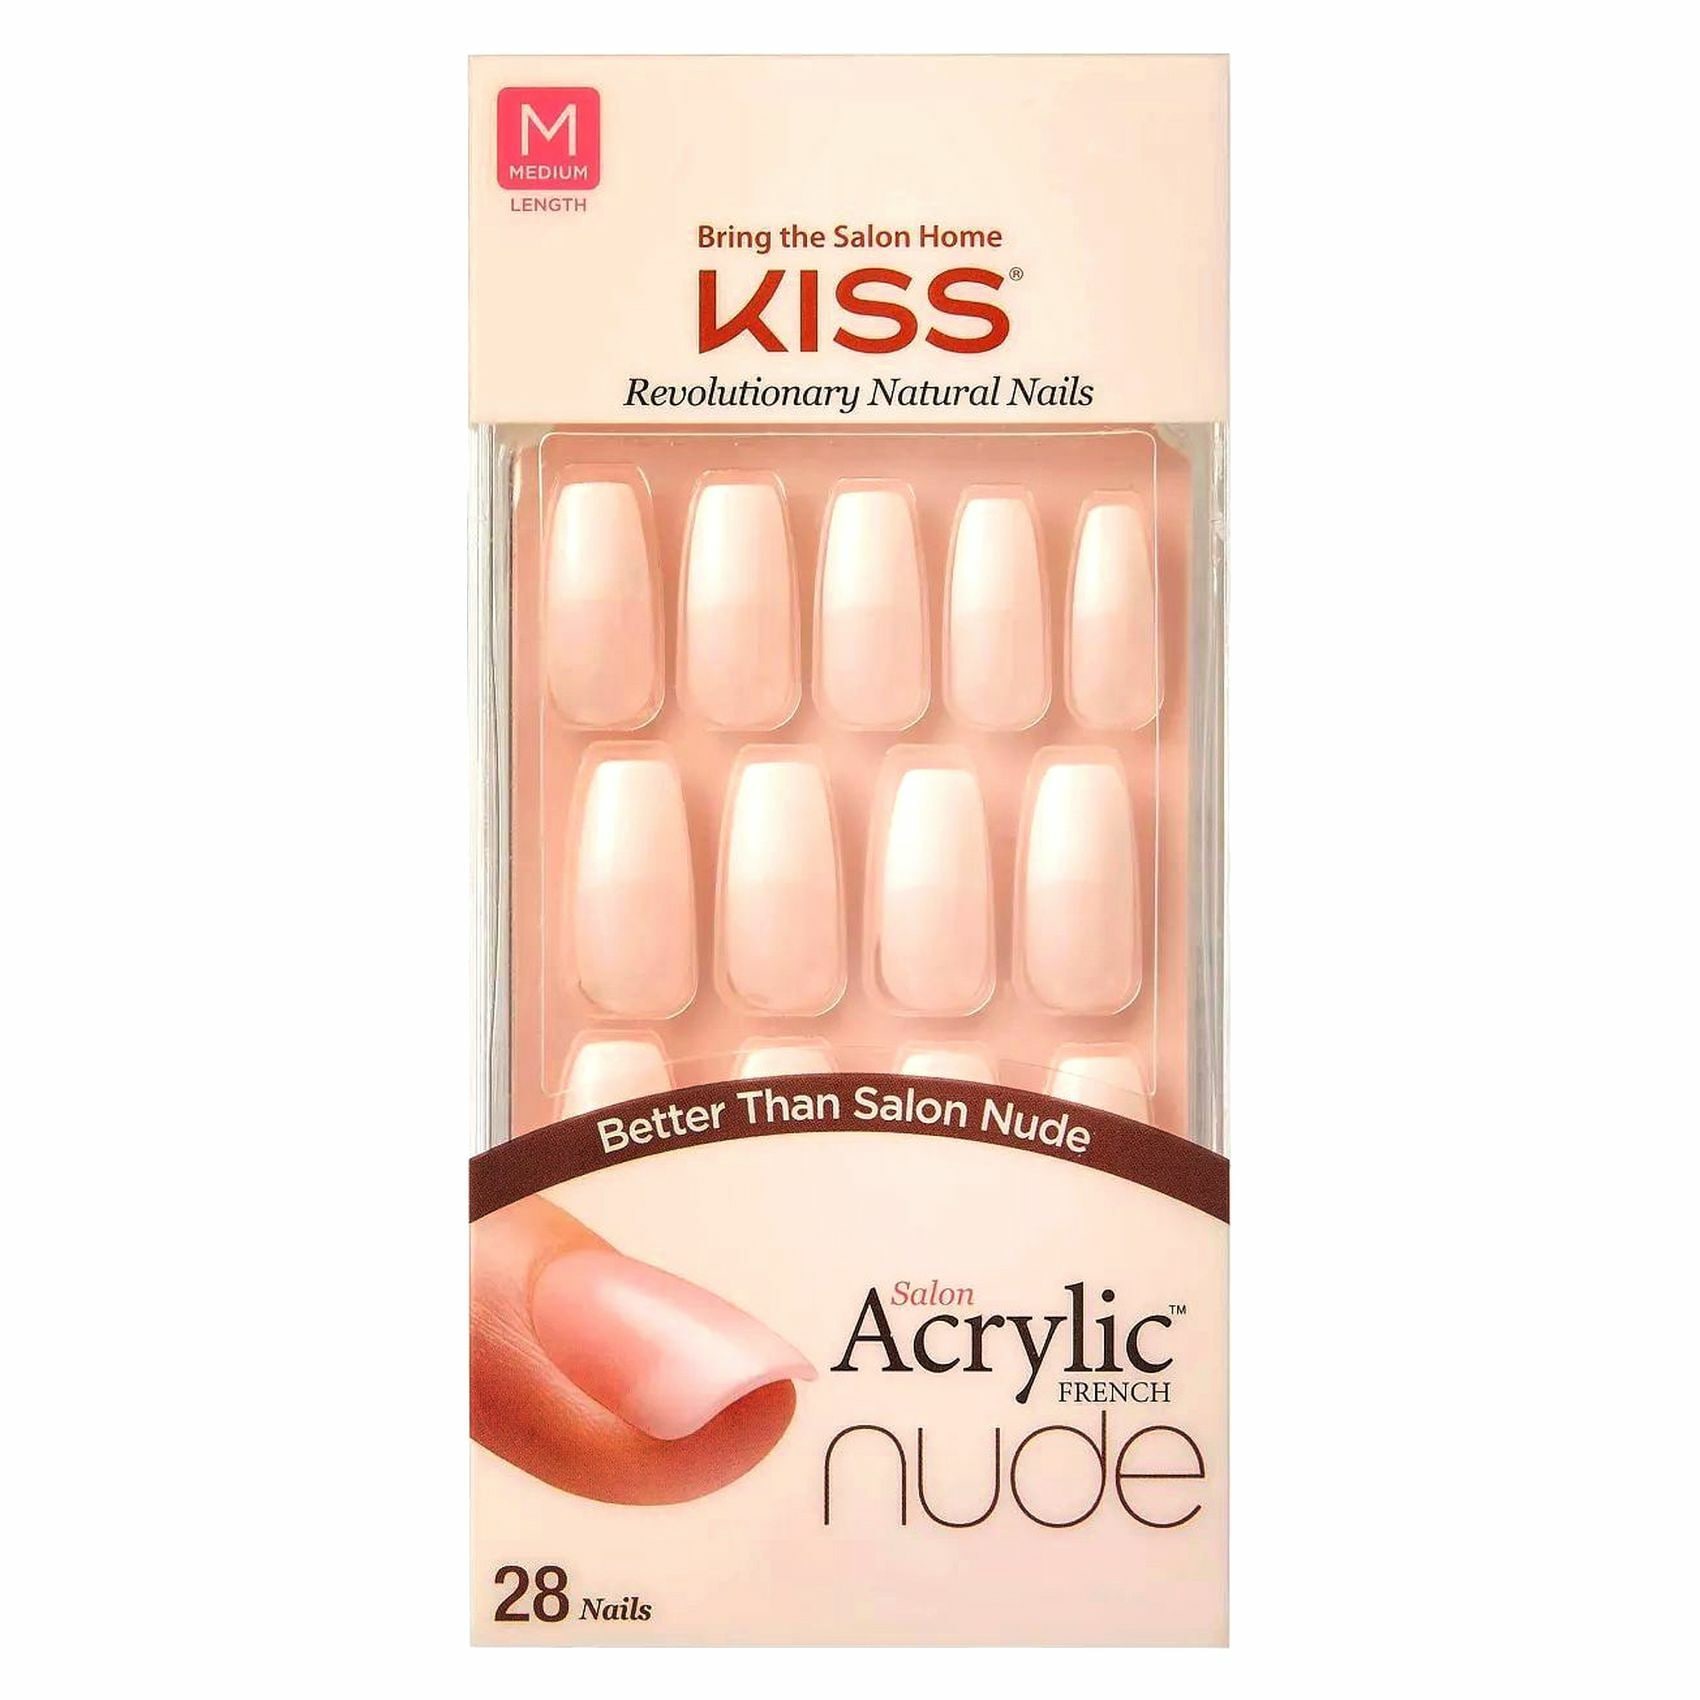 Buy Kiss Salon Acrylic Nude French False Nail Kit Kan07c 31 Count Online Shop Beauty Personal Care On Carrefour Uae